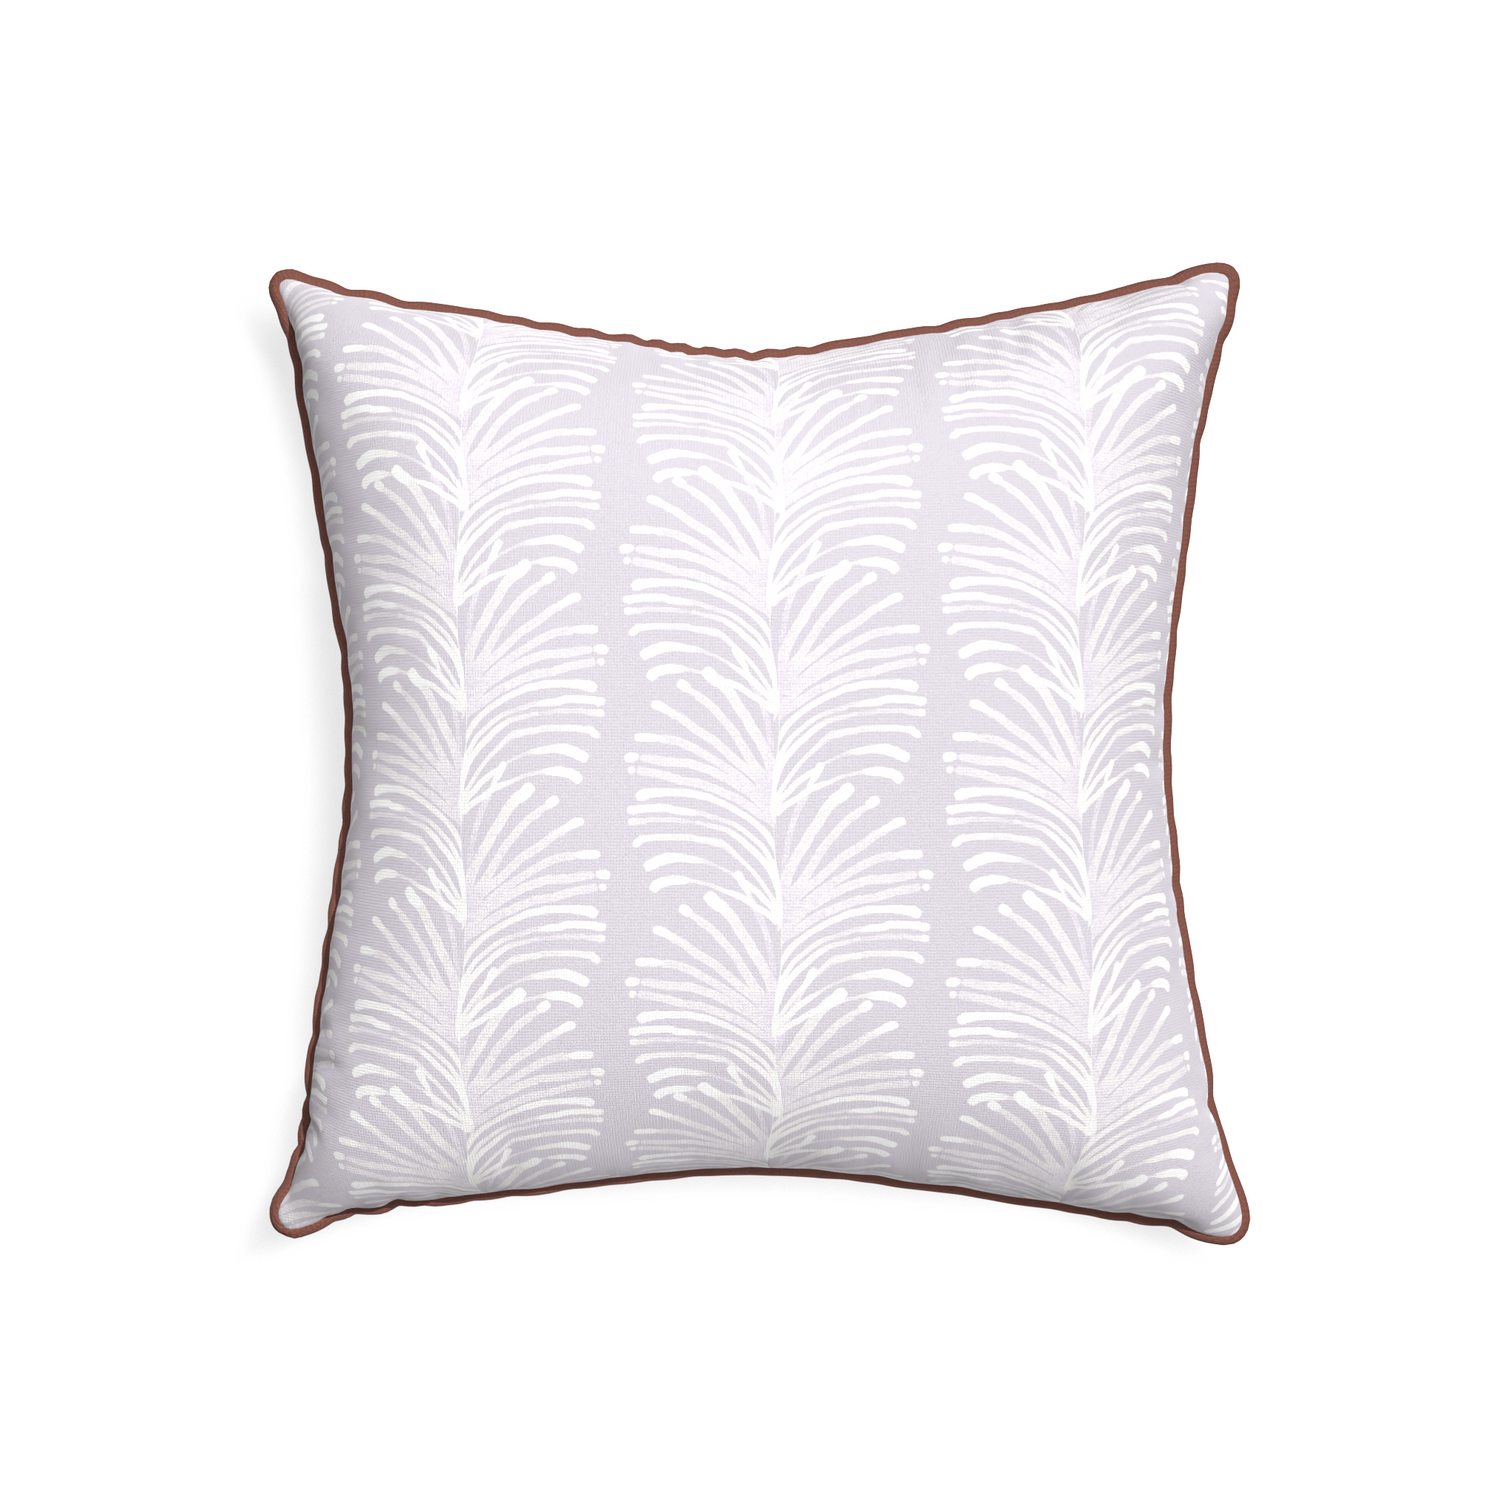 22-square emma lavender custom pillow with w piping on white background